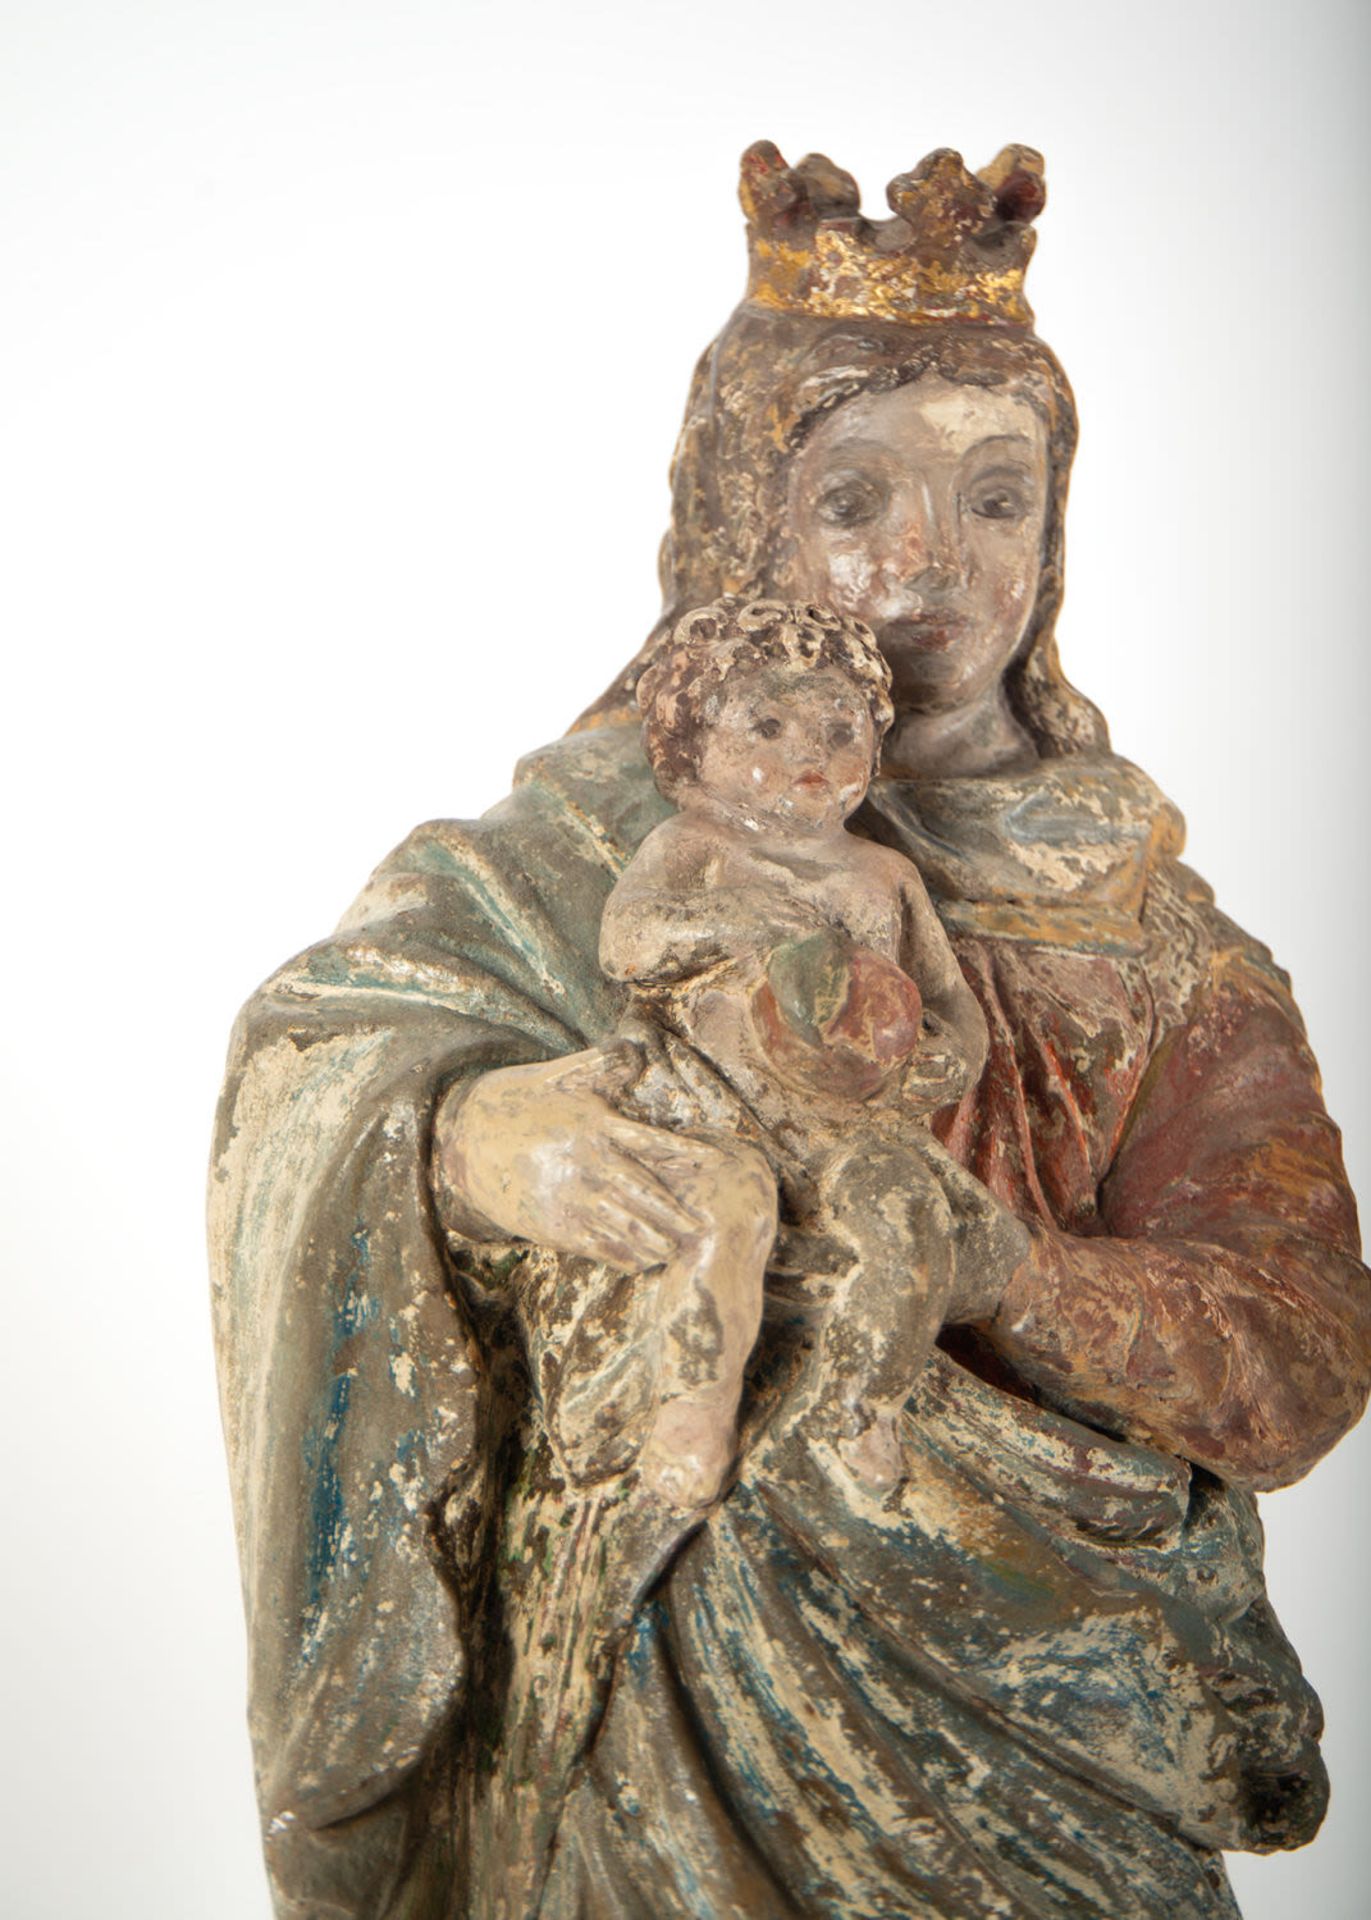 Virgin with Child in polychrome stone, Talleres de Malines, XV - XVI centuries - Image 9 of 14